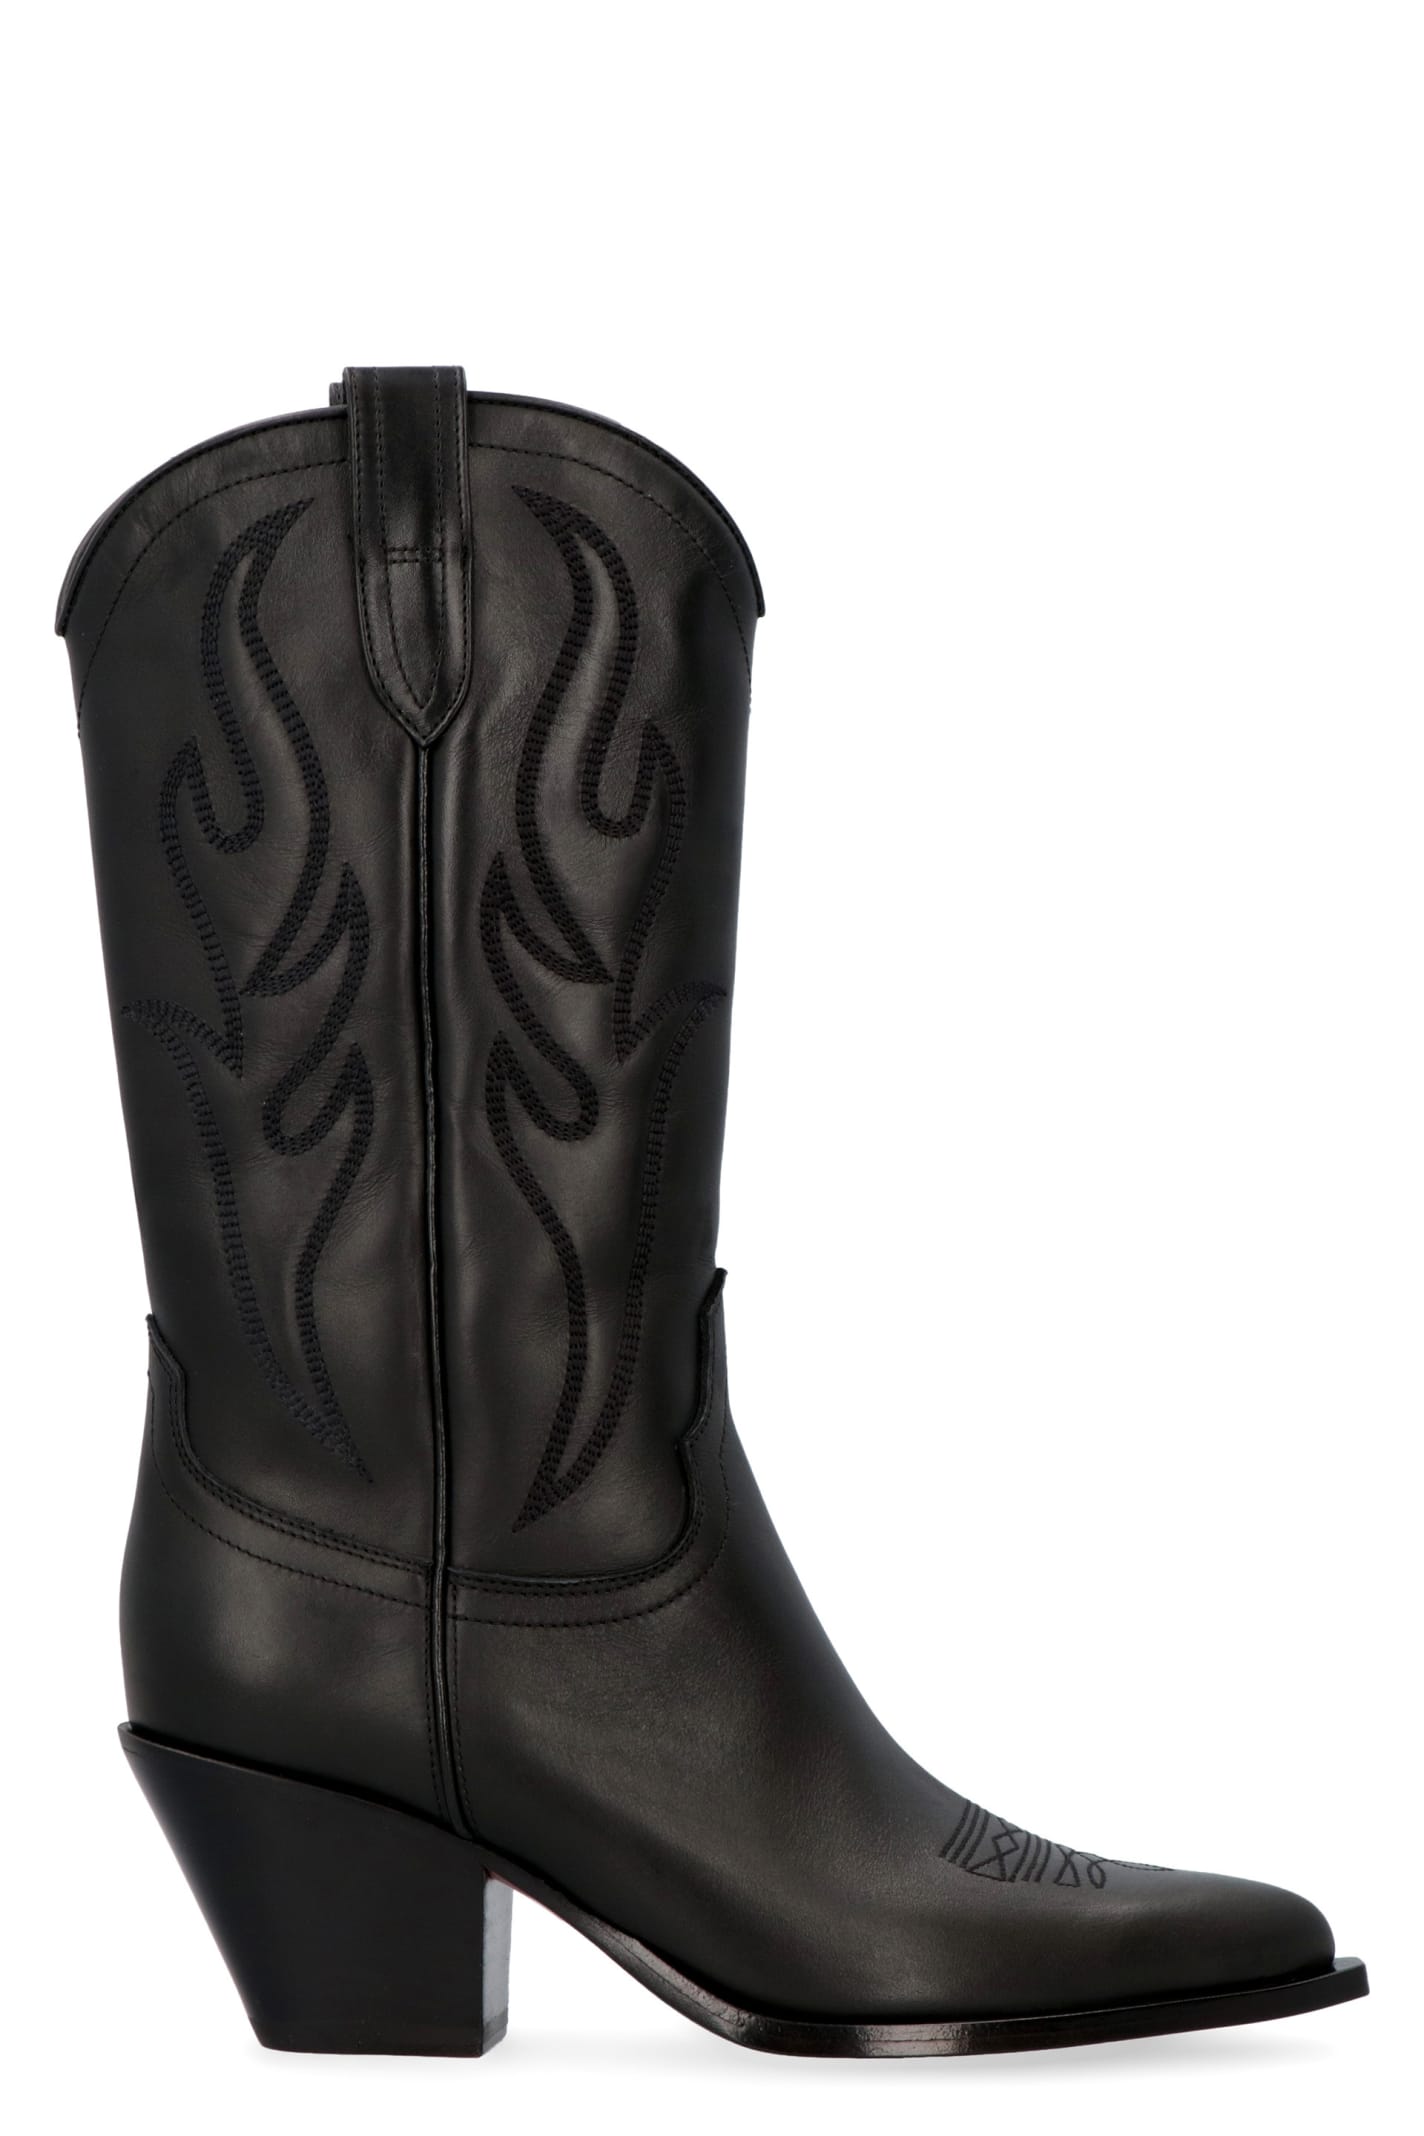 Sonora Santafe Western-style Boots